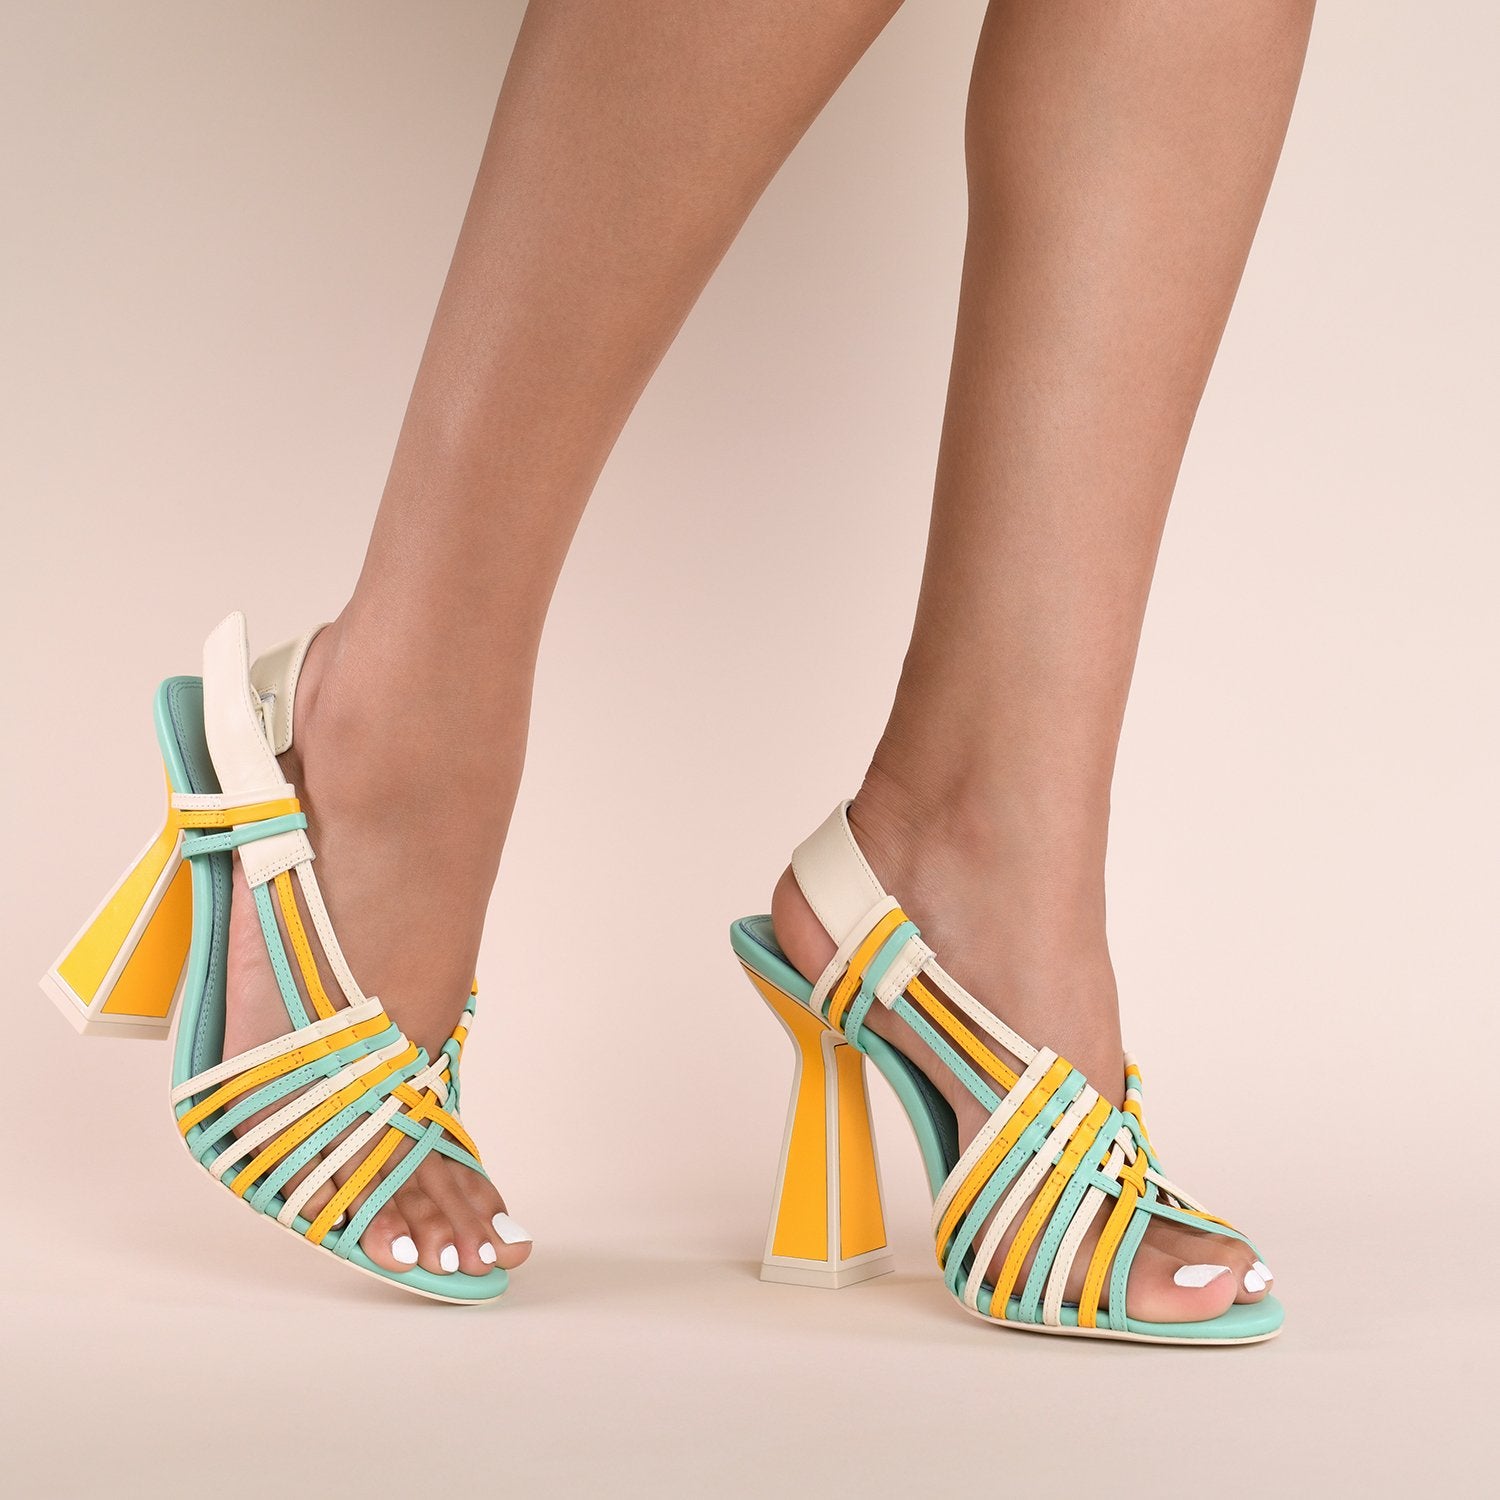 Front inner and outer side views of a model wearing a pair of the kat maconie sheri sandal. This strappy sandal has a high heel and a mix of turquoise, yellow, and white colored straps. The white back strap is wider and adjustable. The heel is yellow and outlined with opal/white.